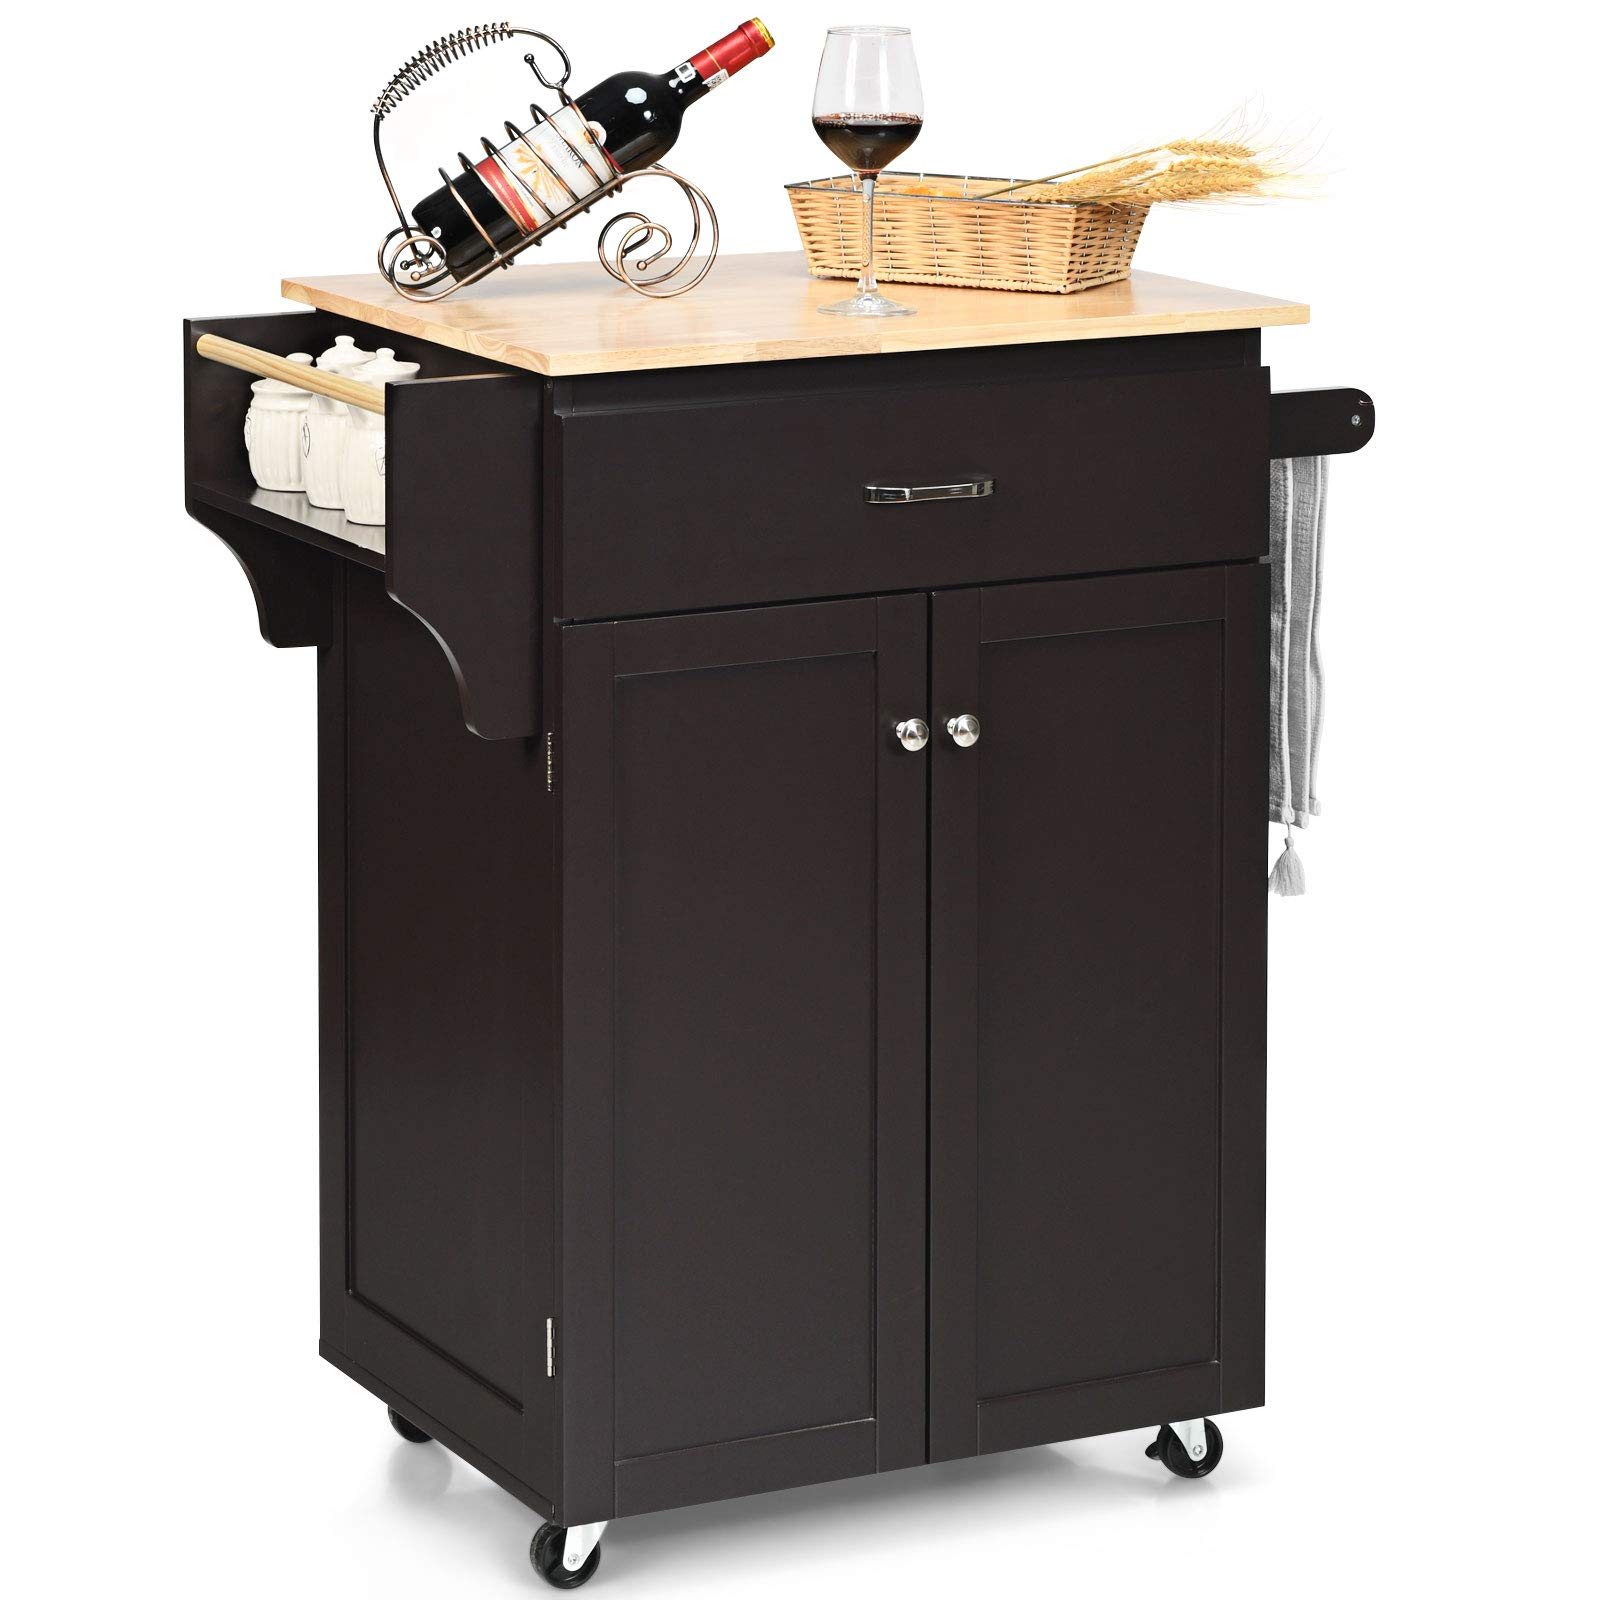 Giantex Rolling Kitchen Island, Kitchen Trolley Cart with Spice Rack, Large Drawer